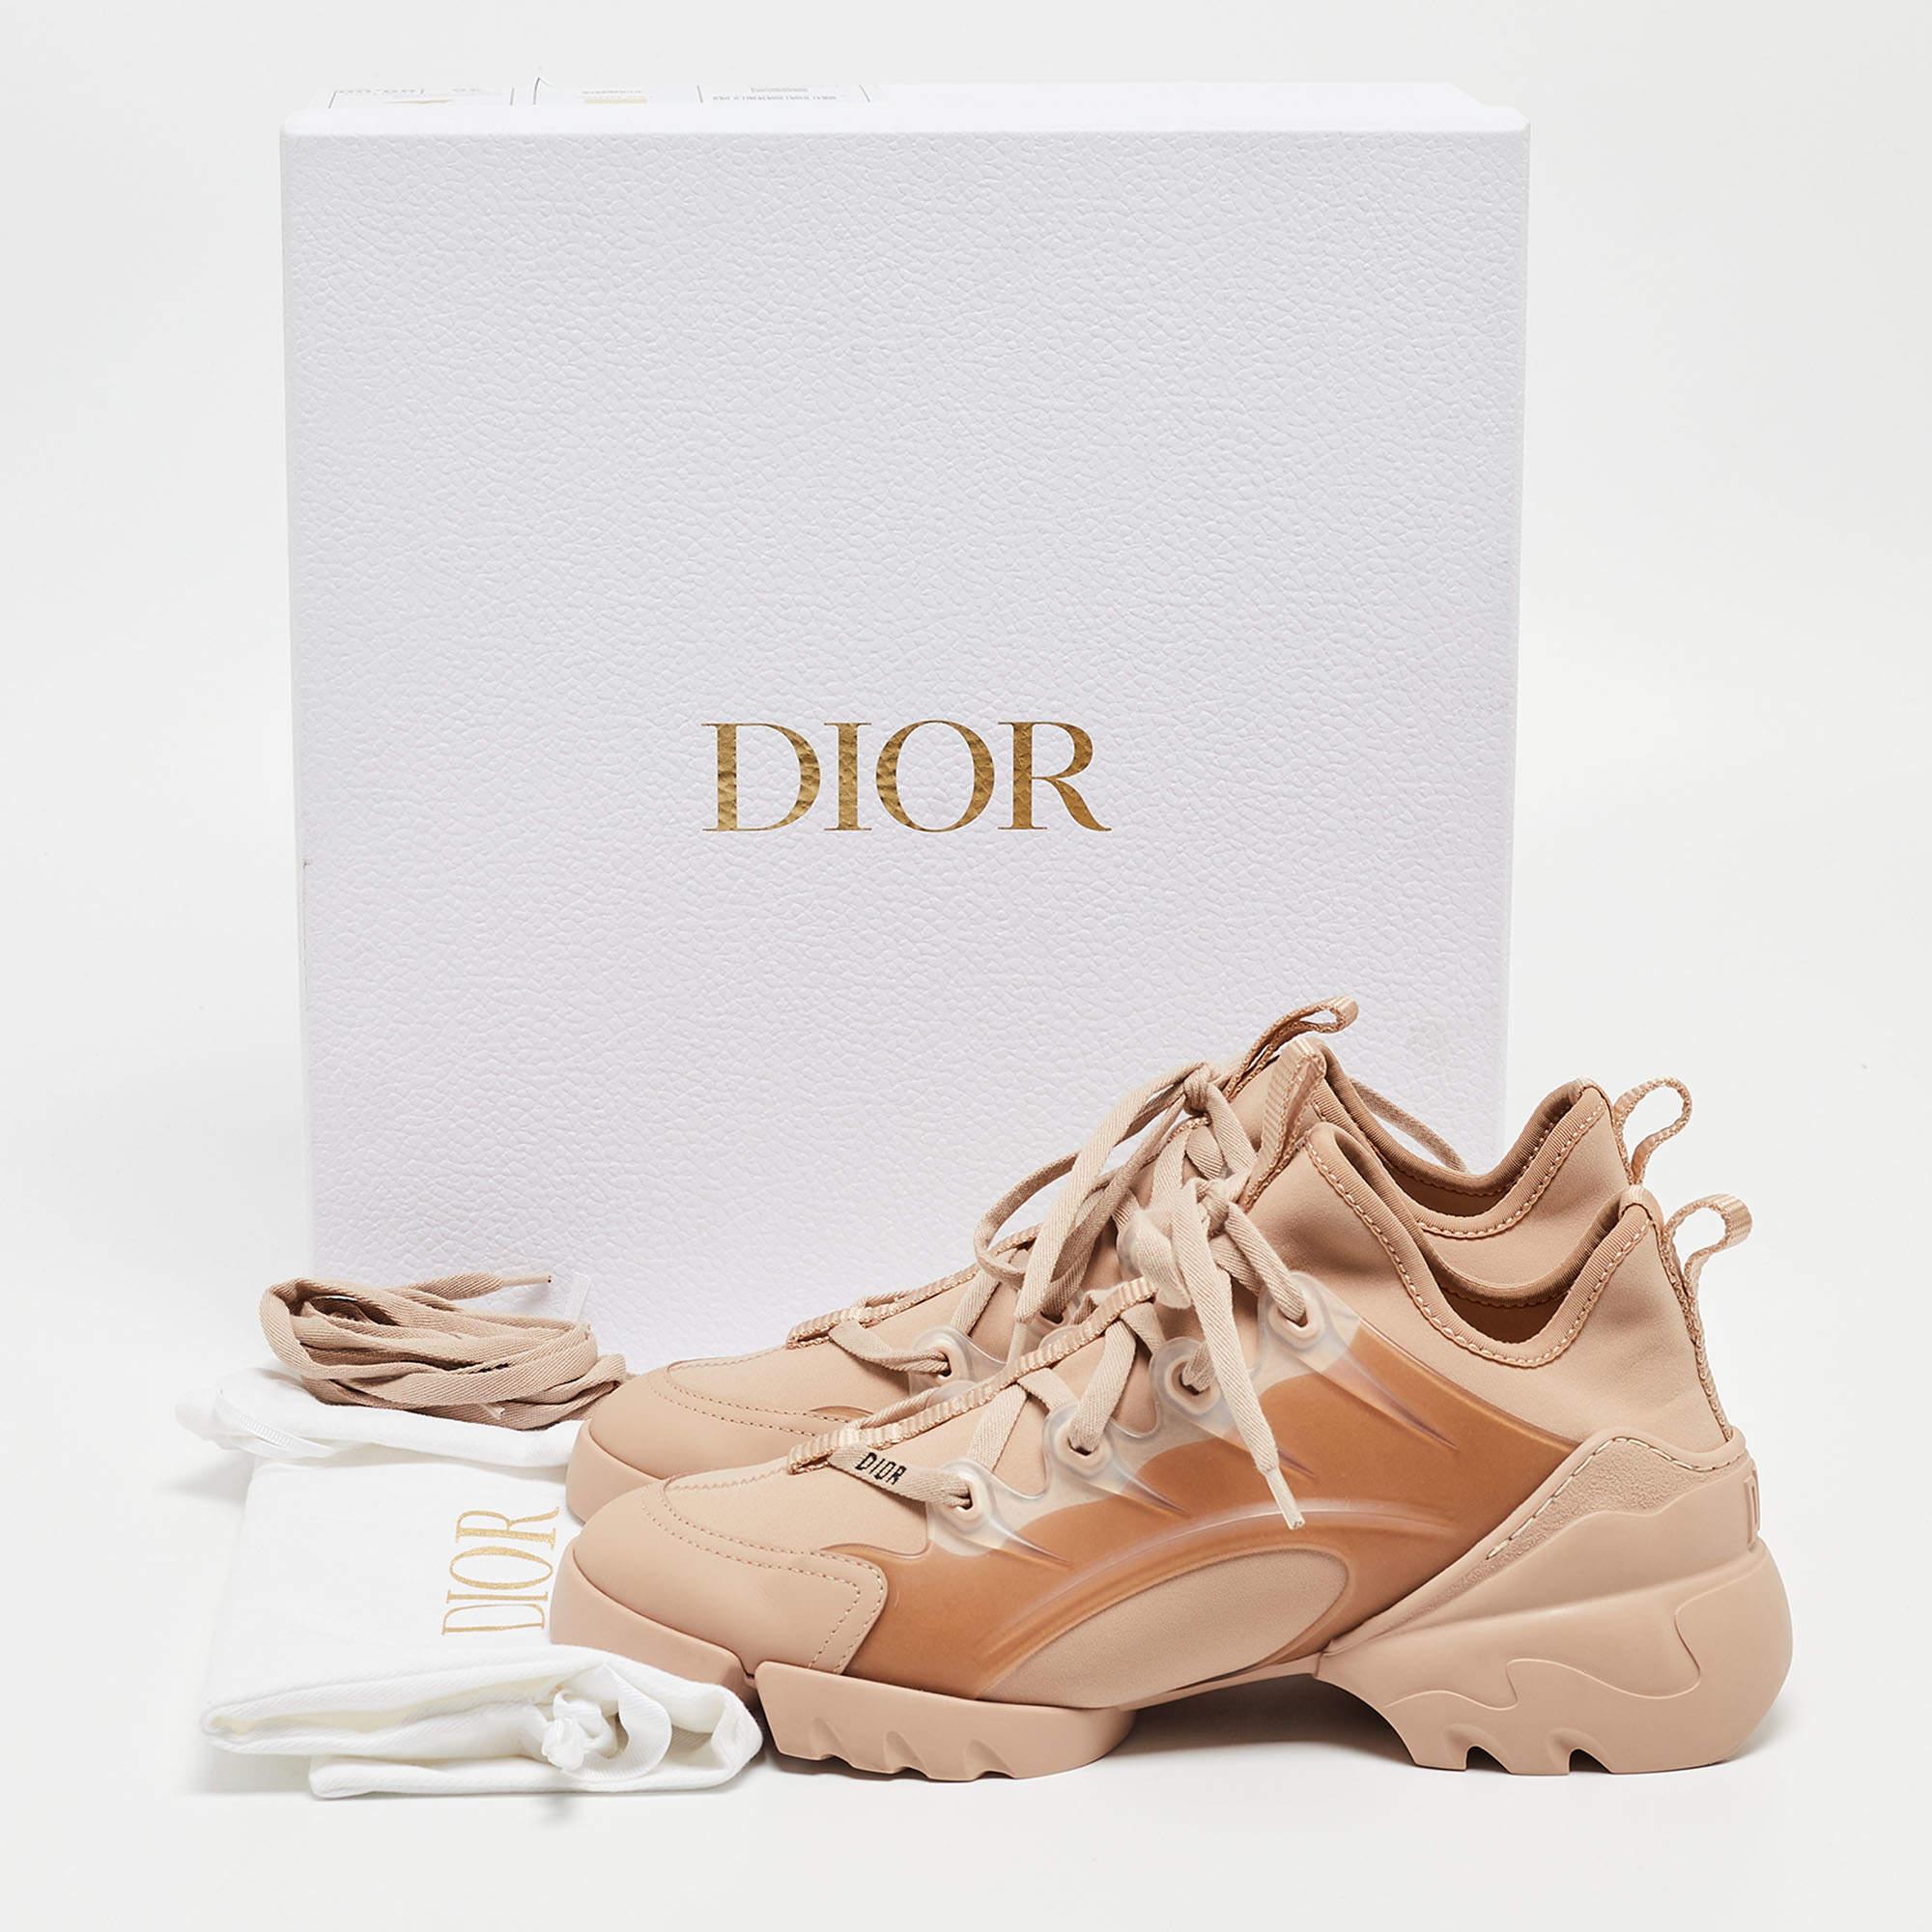 Dior Beige Neoprene and Leather D-Connect Sneakers Size 38 2